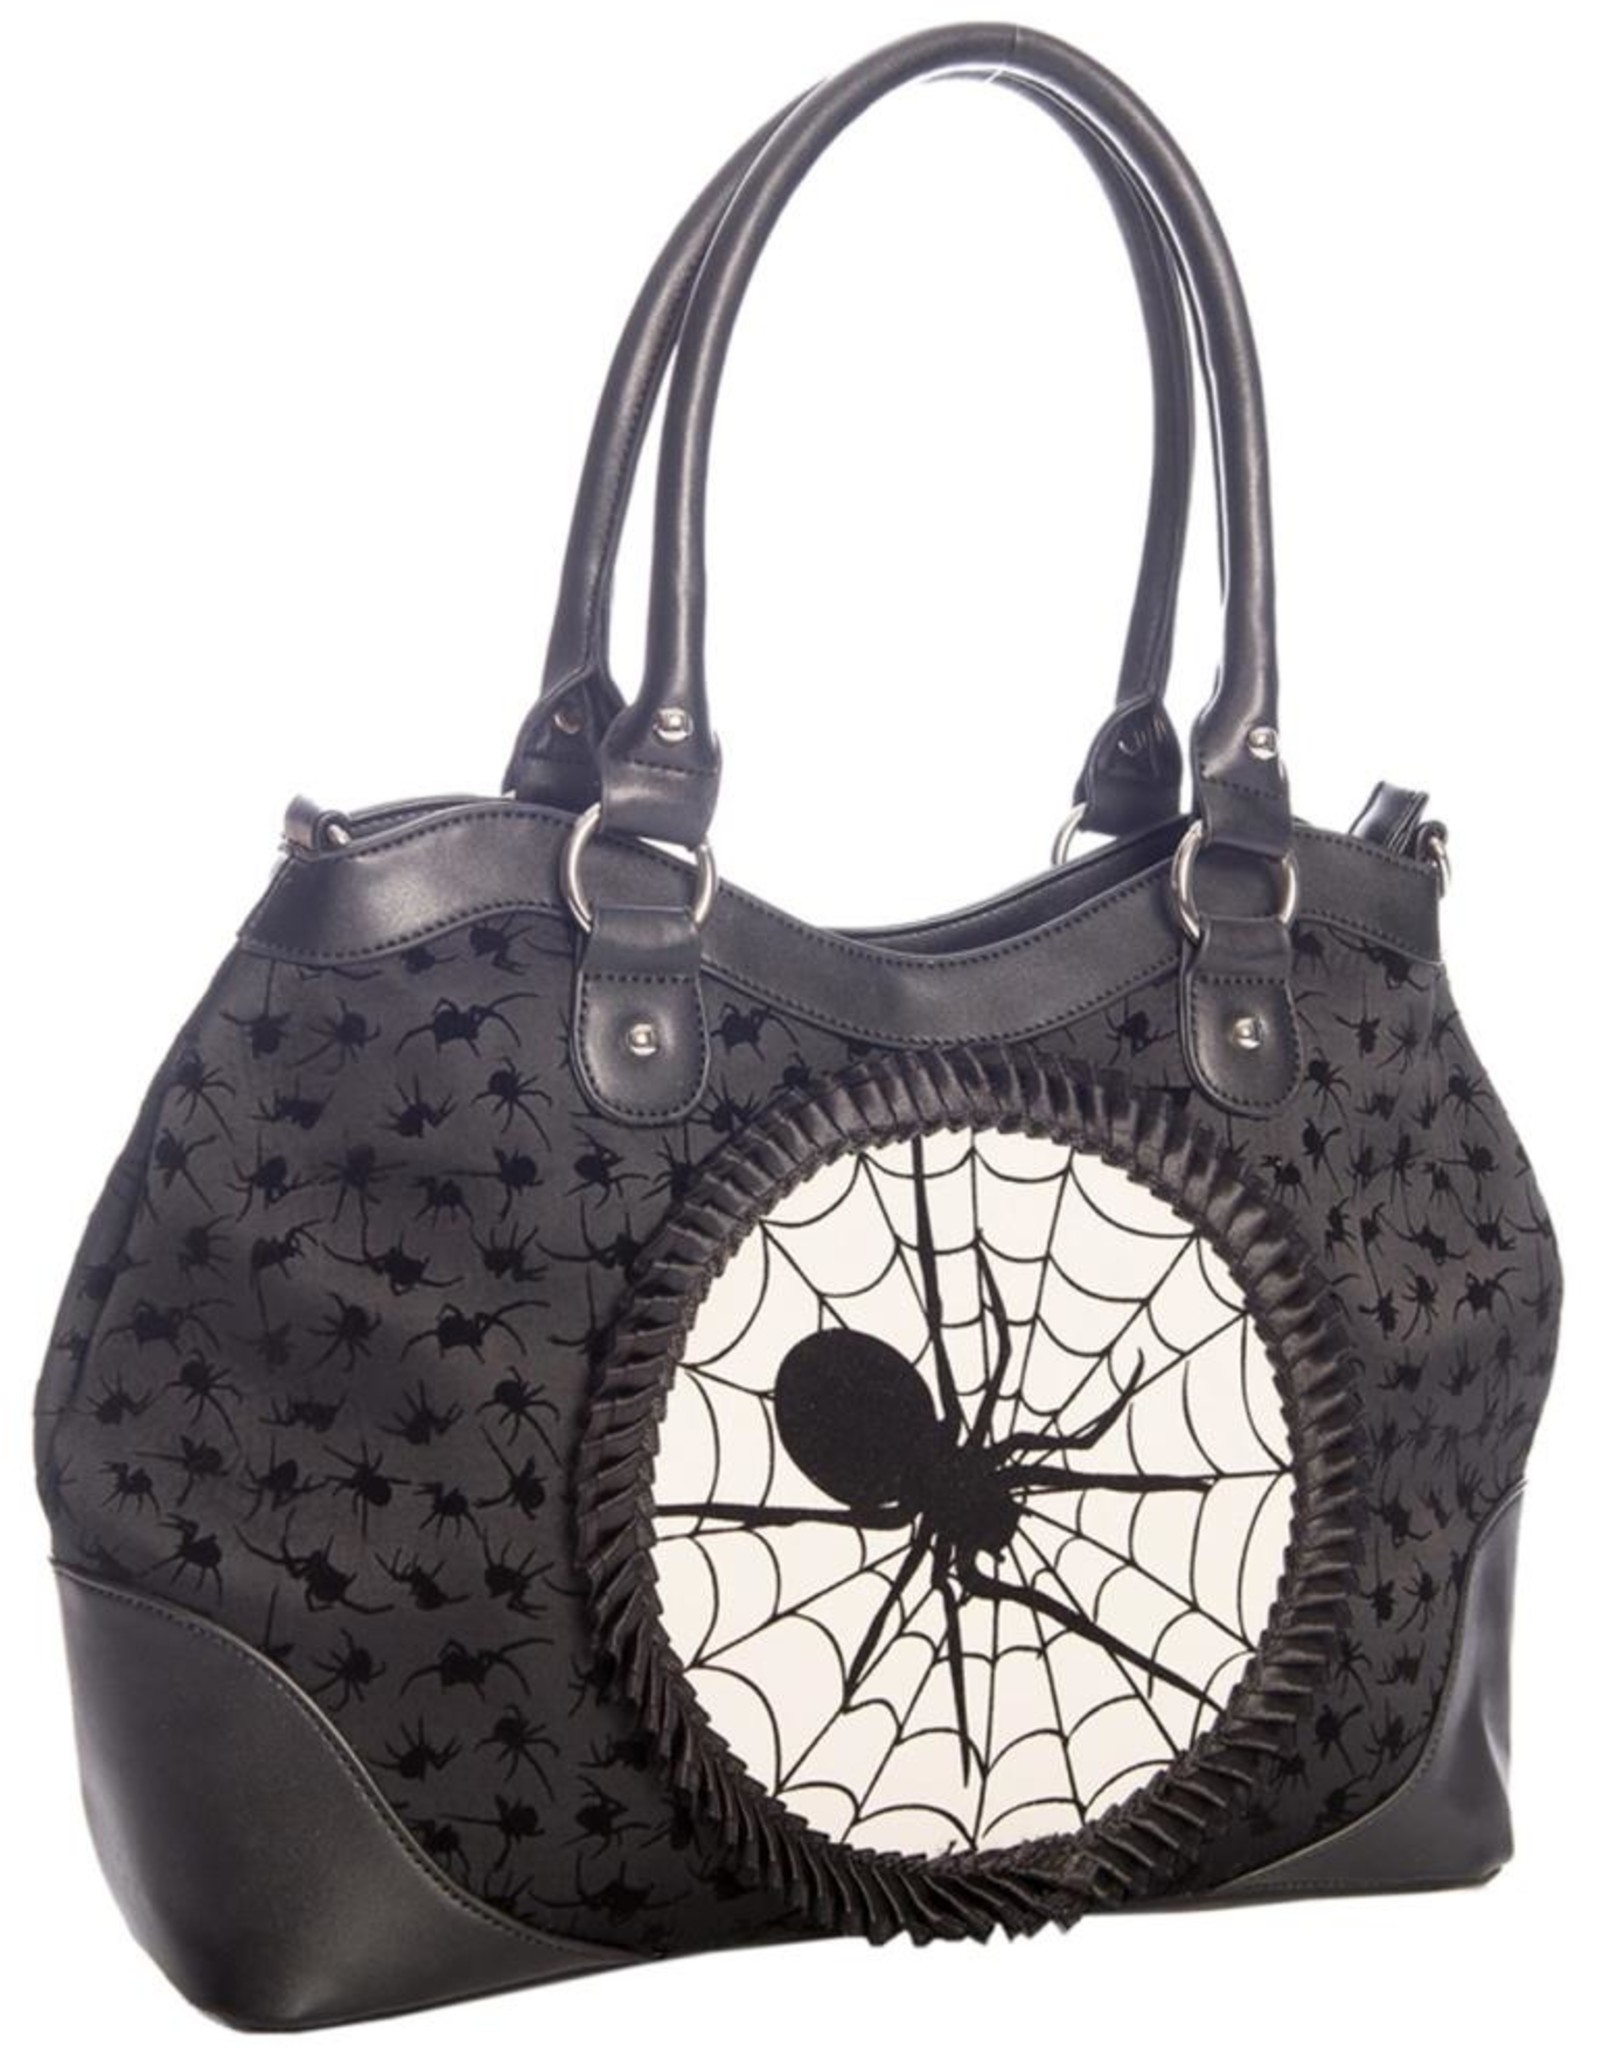 Banned Gothic bags Steampunk bags - Banned Spinderella Handbag with Large Velvet Spider